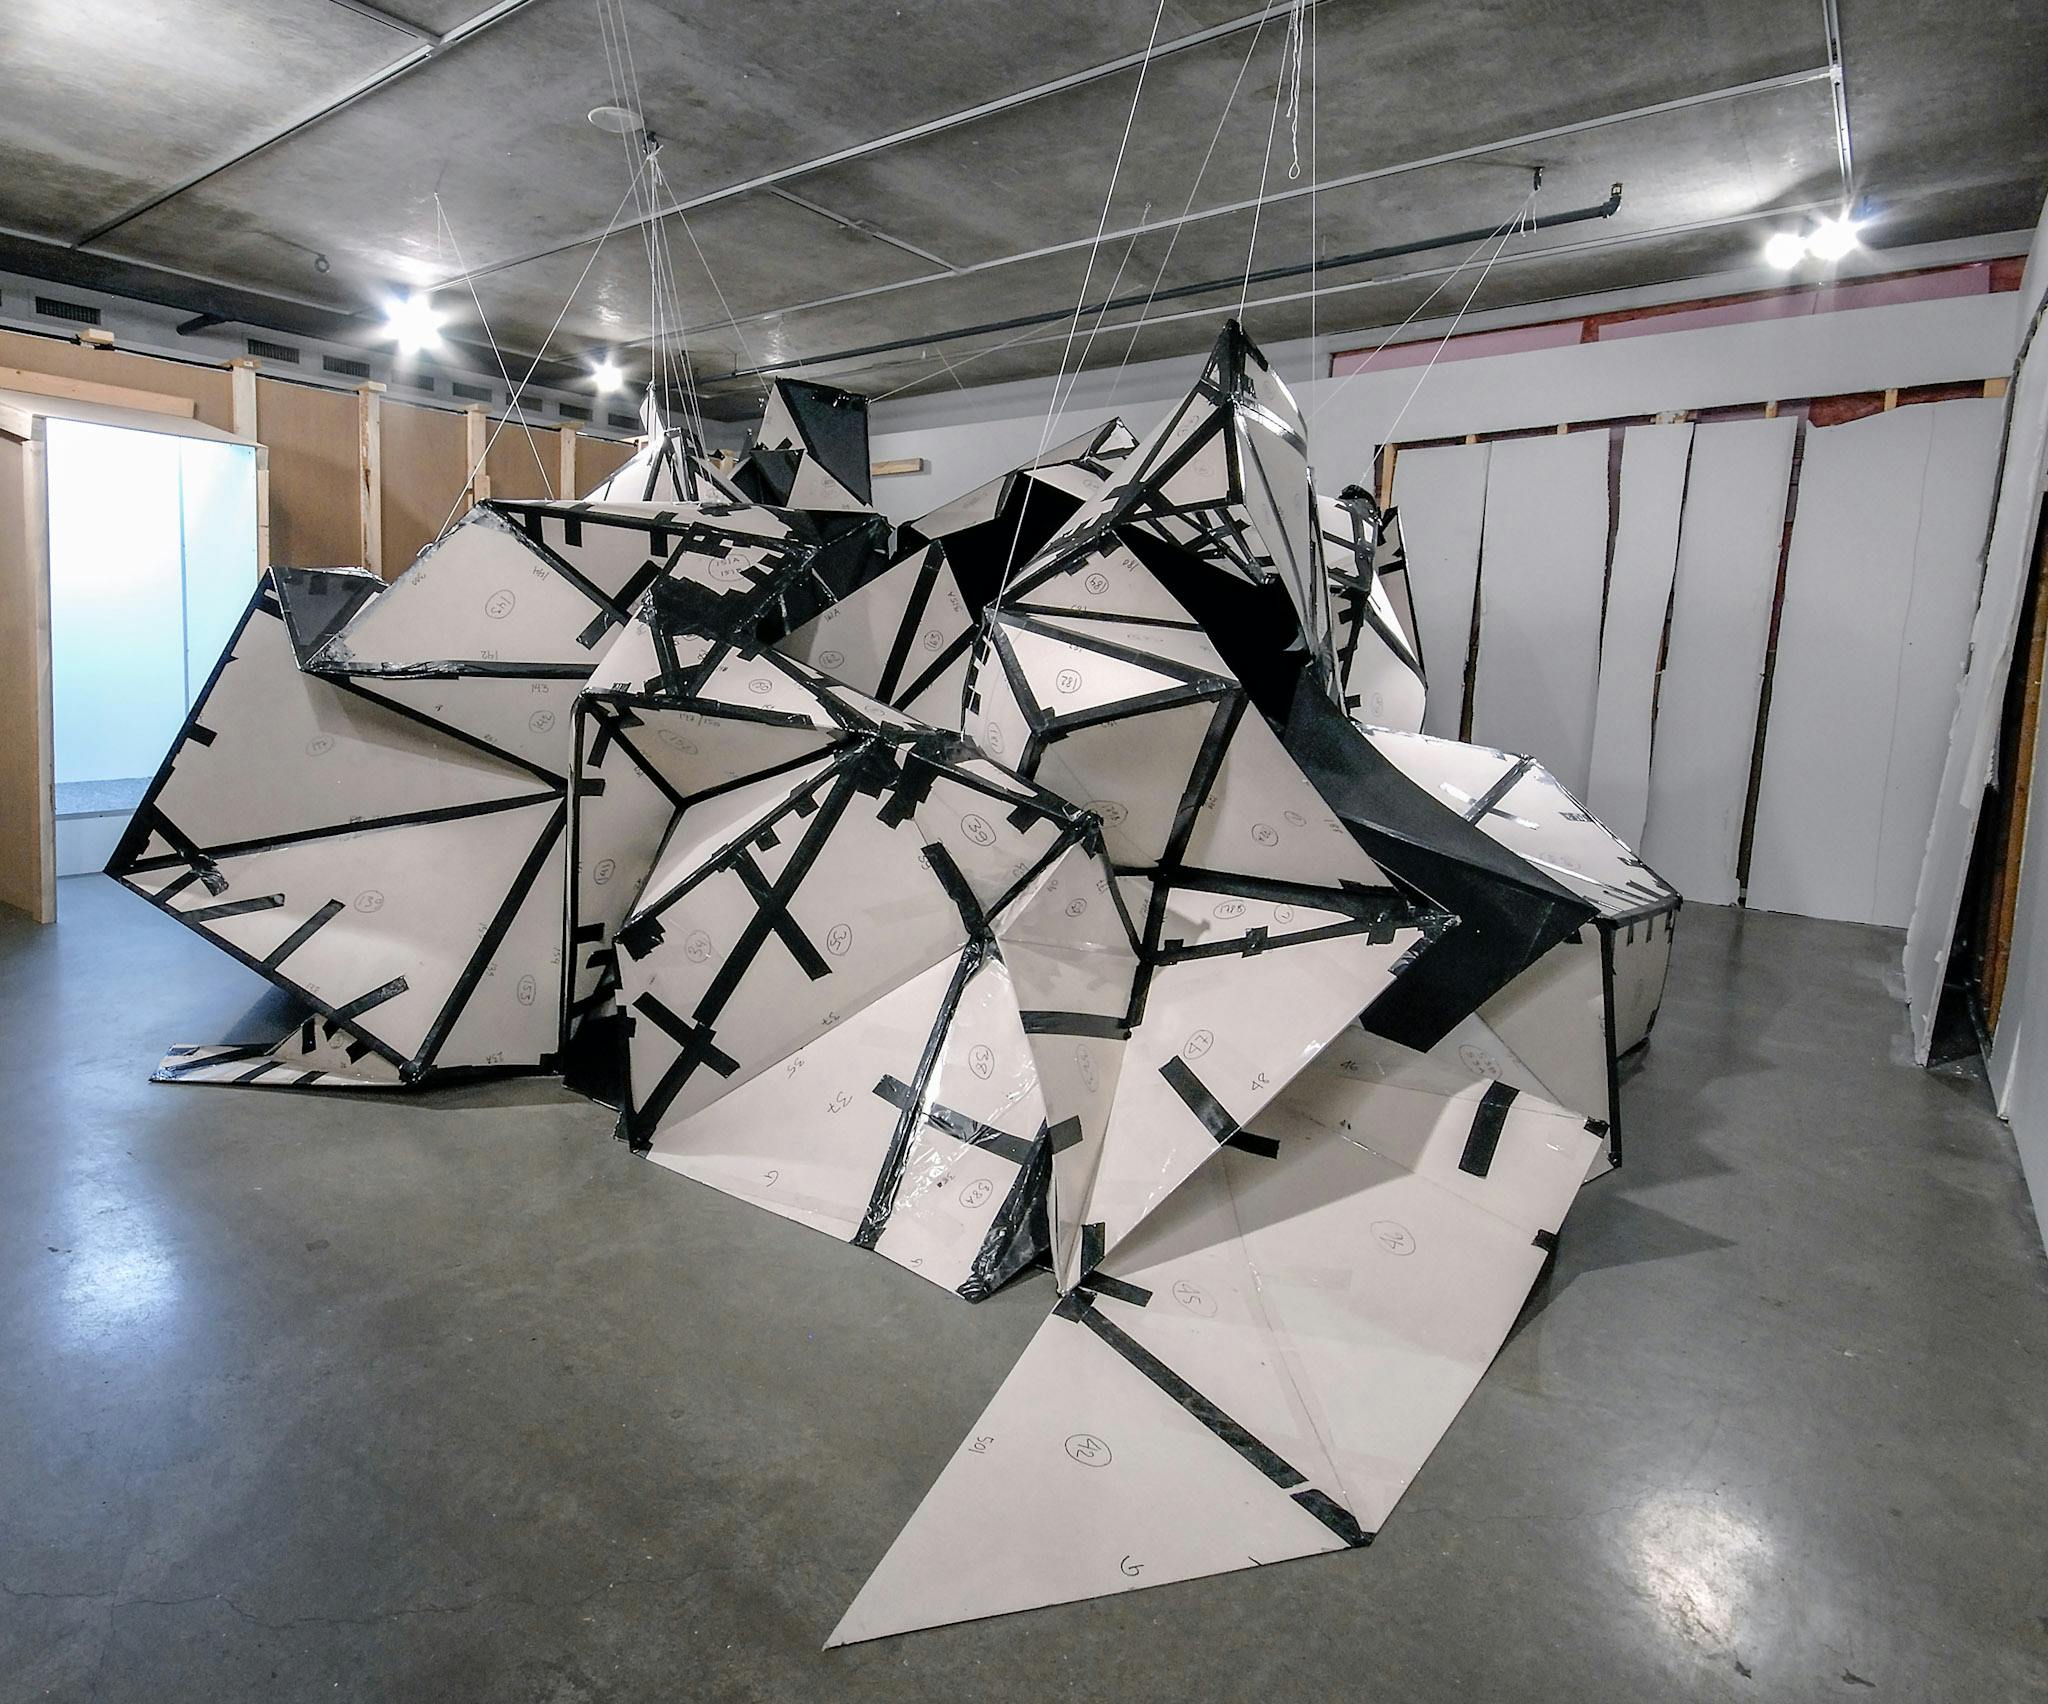 A large white and black sculpture is placed on a gallery floor. It is partially hanging from the ceiling via transparent wires. The sculpture resembles a half-completed paper origami. 